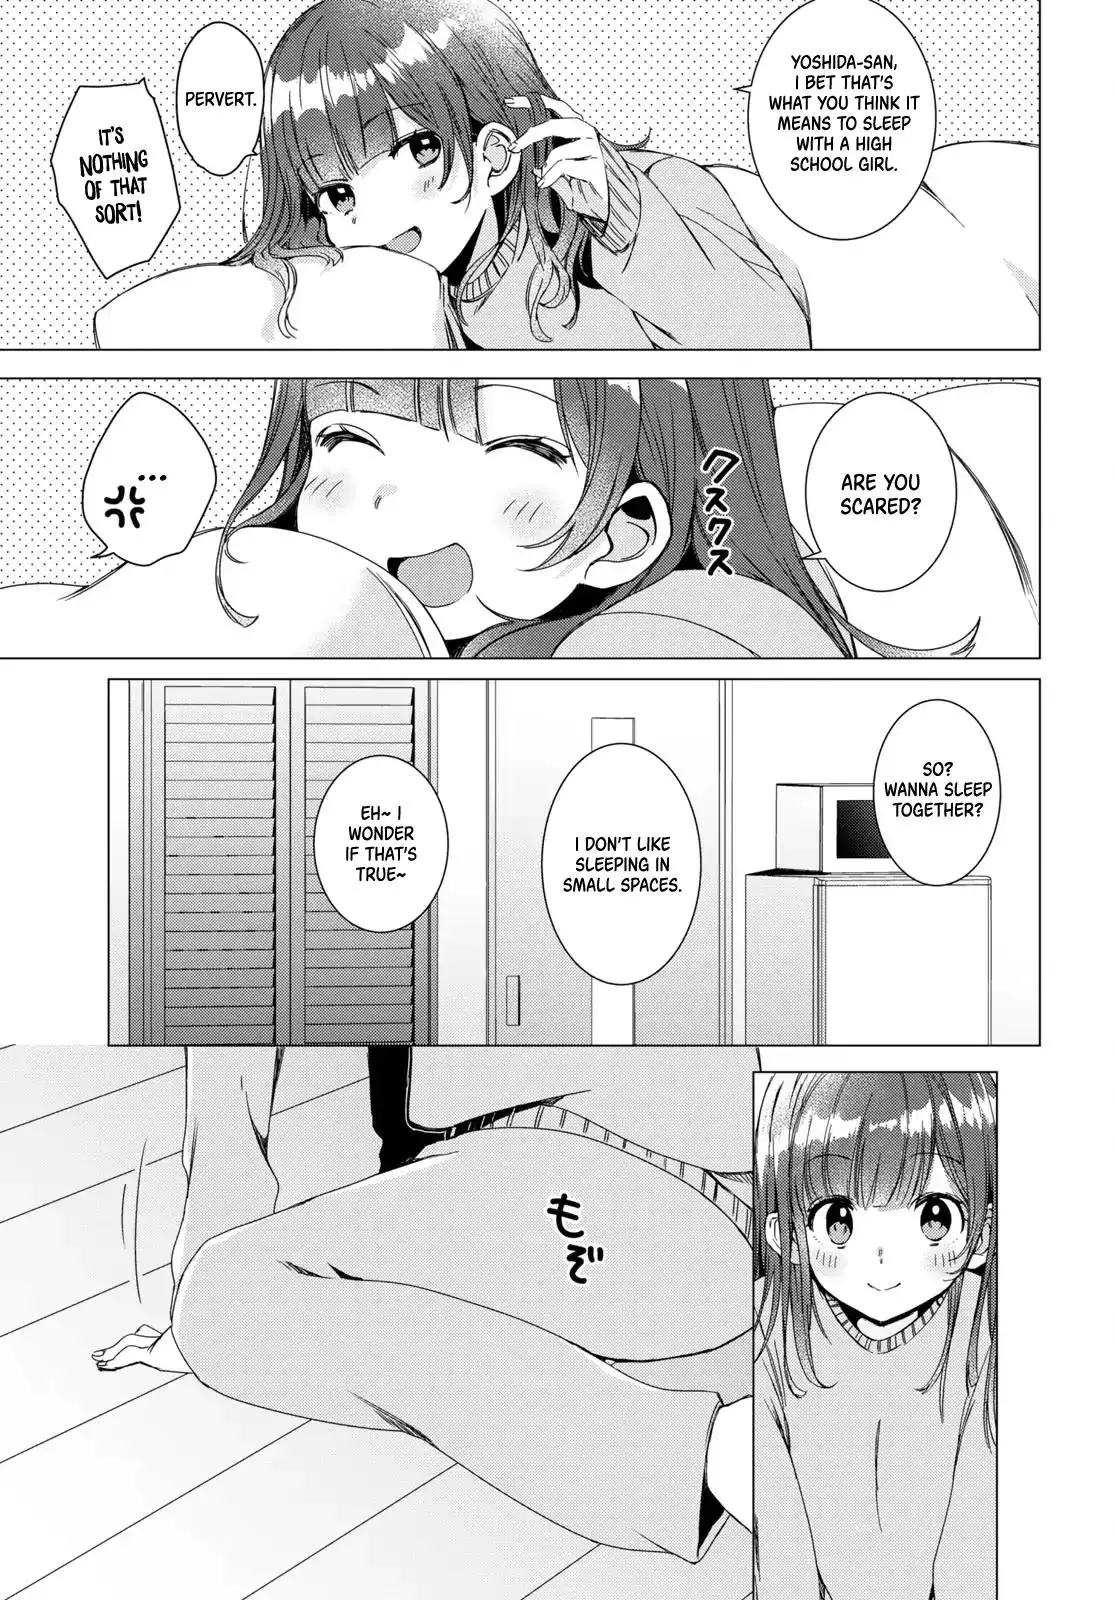 I Shaved. Then I Brought a High School Girl Home. - 2 page 25